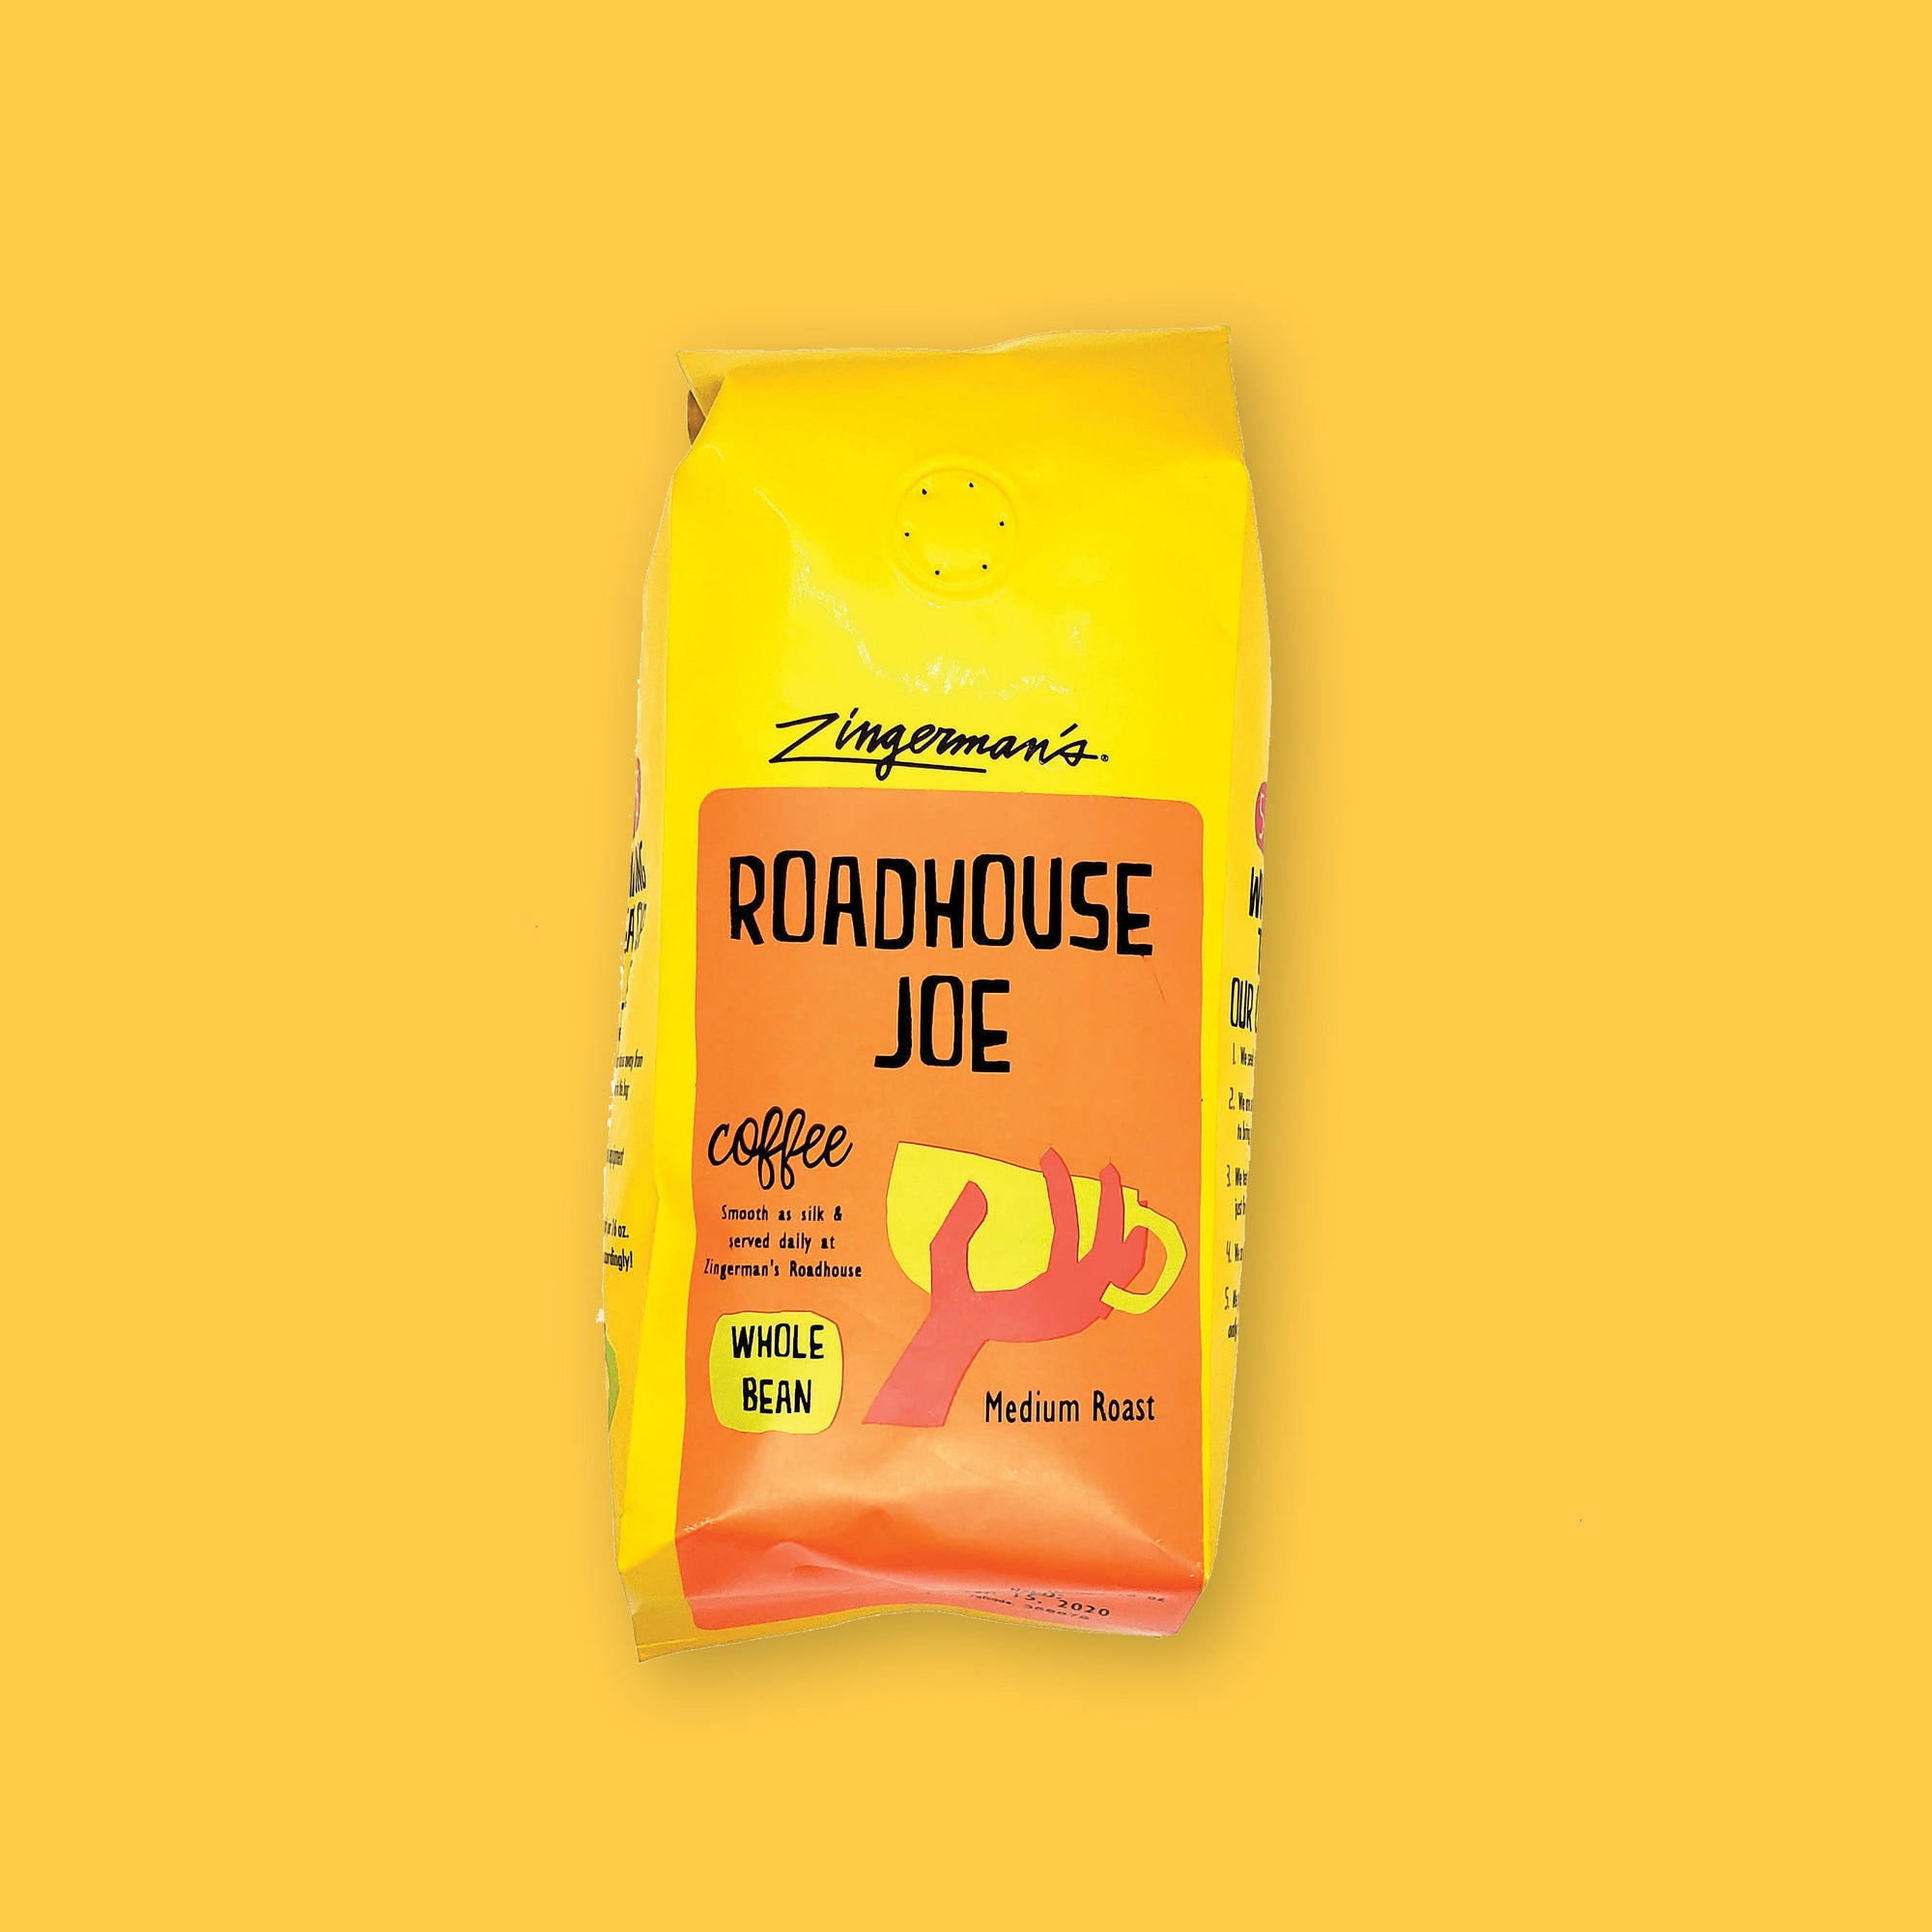 On a sunny mustard background is a yellow bag of coffee. The coffee is Zingerman's brand Roadhouse Joe Blend. 'Smooth as silk and served daily at Zingerman's Roadhouse' Ground coffee. 12 oz (350 g)